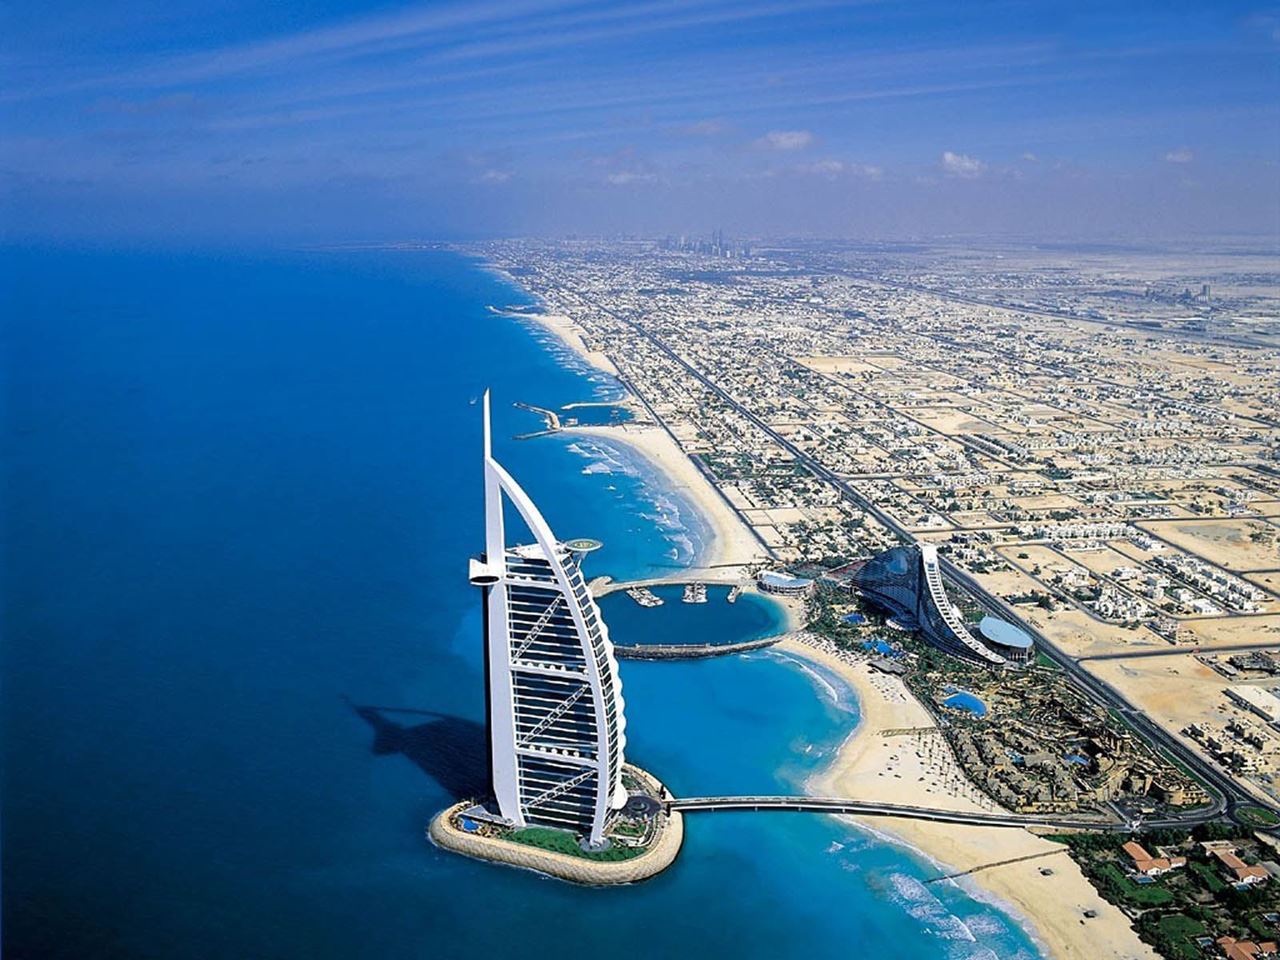 Dubai tops the list of the most reputable cities in Middle East